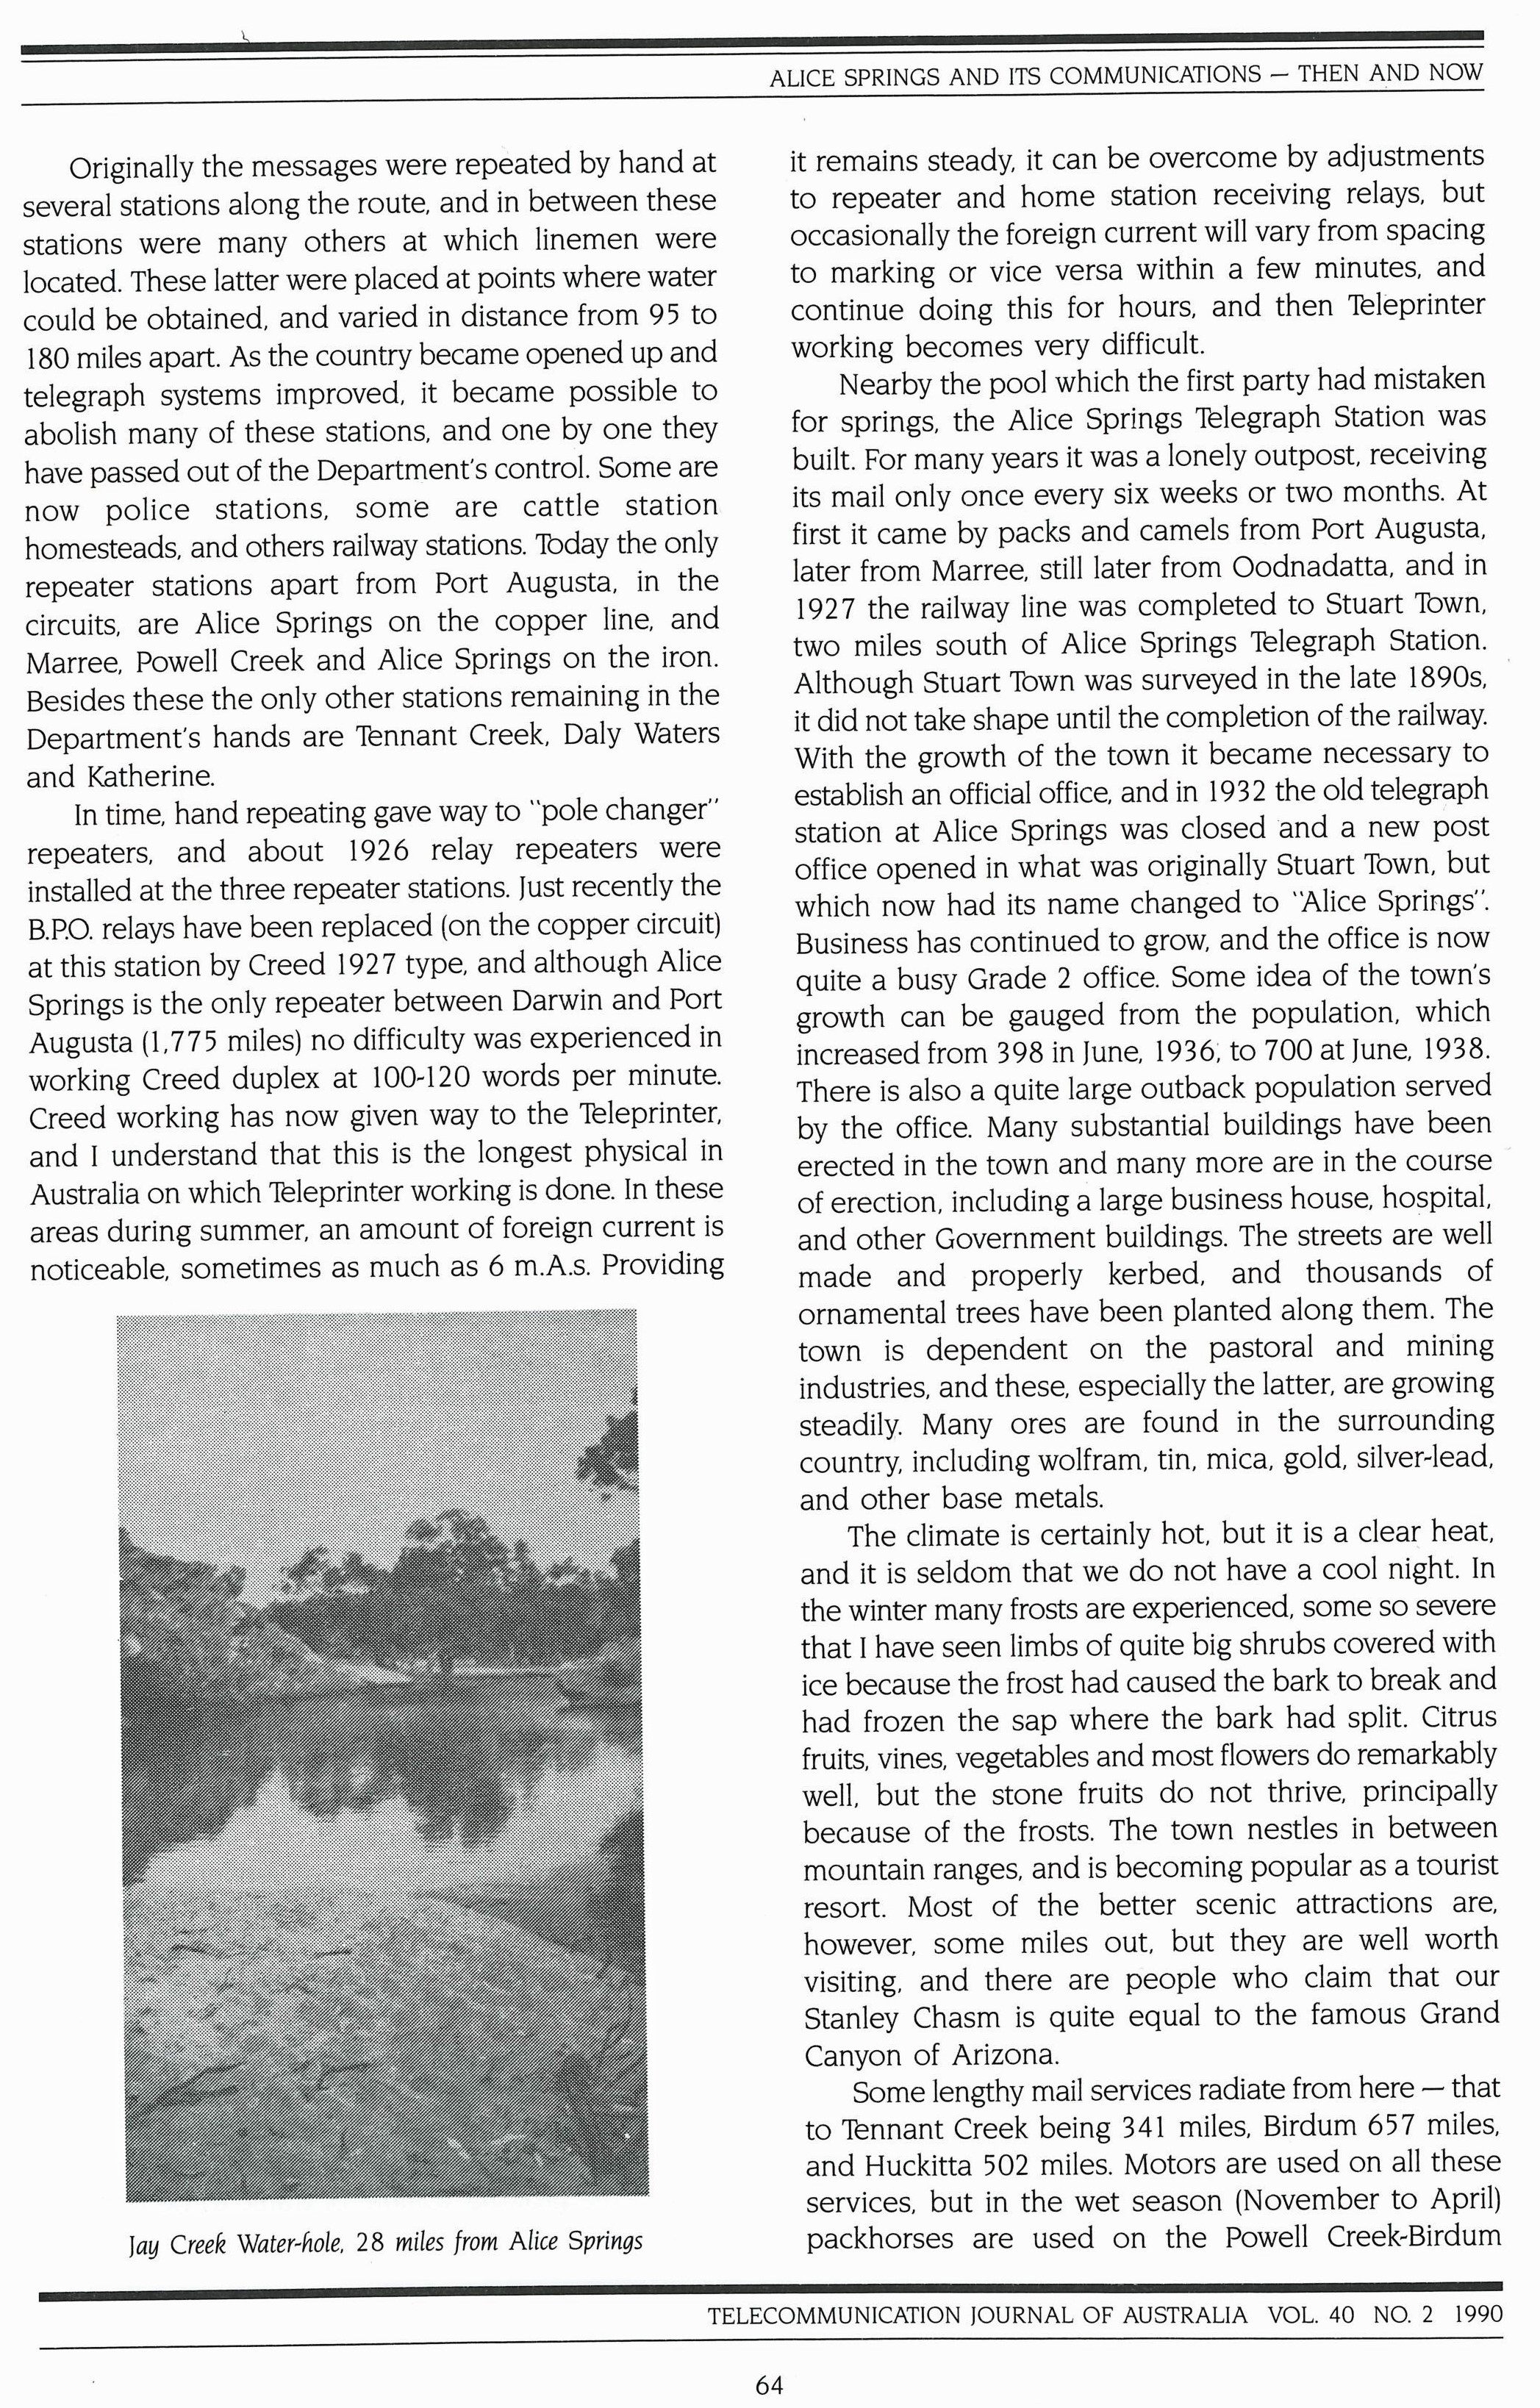 Page 3 of 1990 historical paper